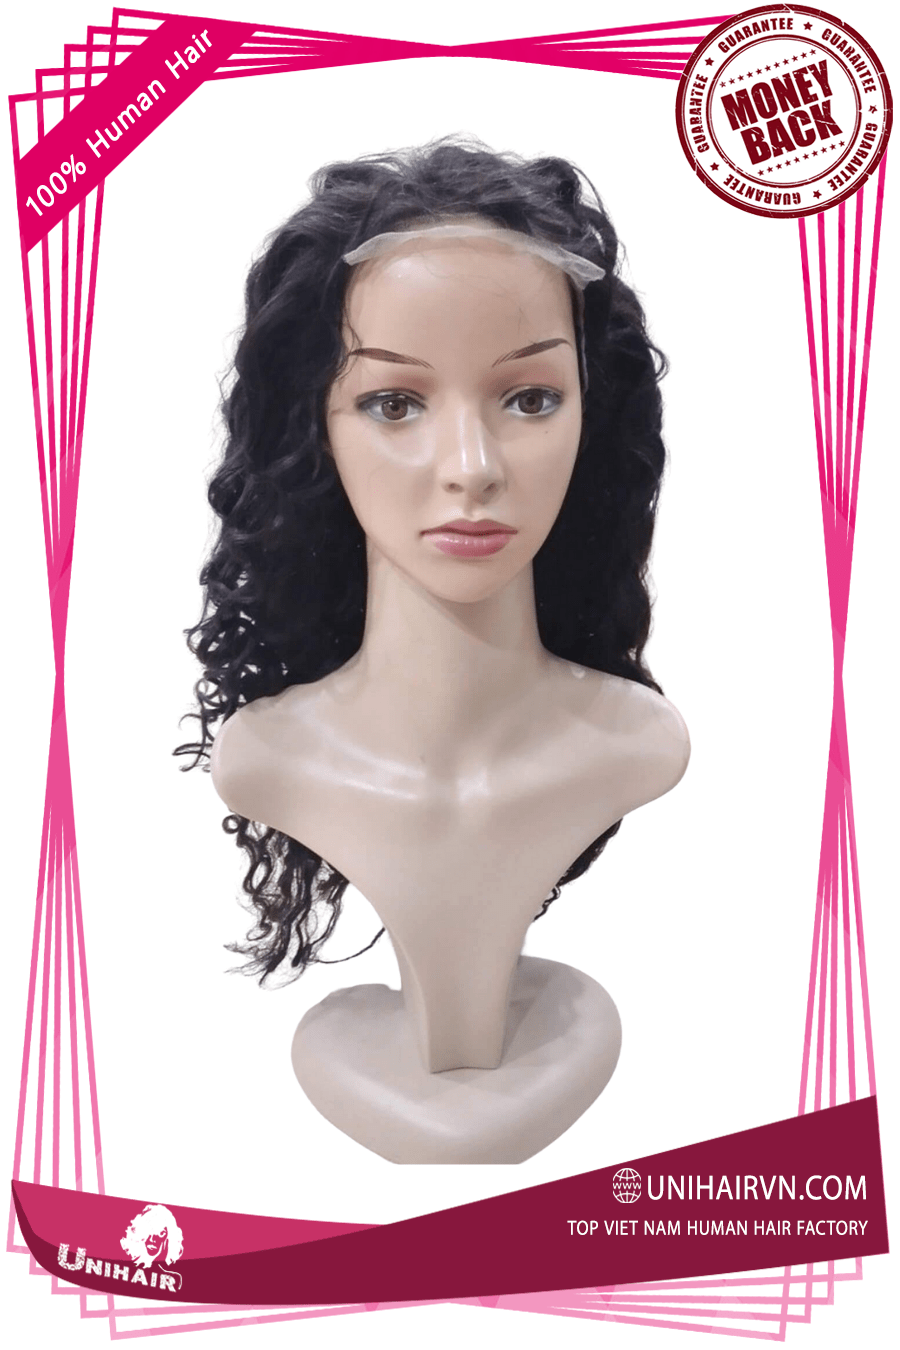 Real Human Hair Wigs - Unihairvn- Vietnam Natural Hair Factory